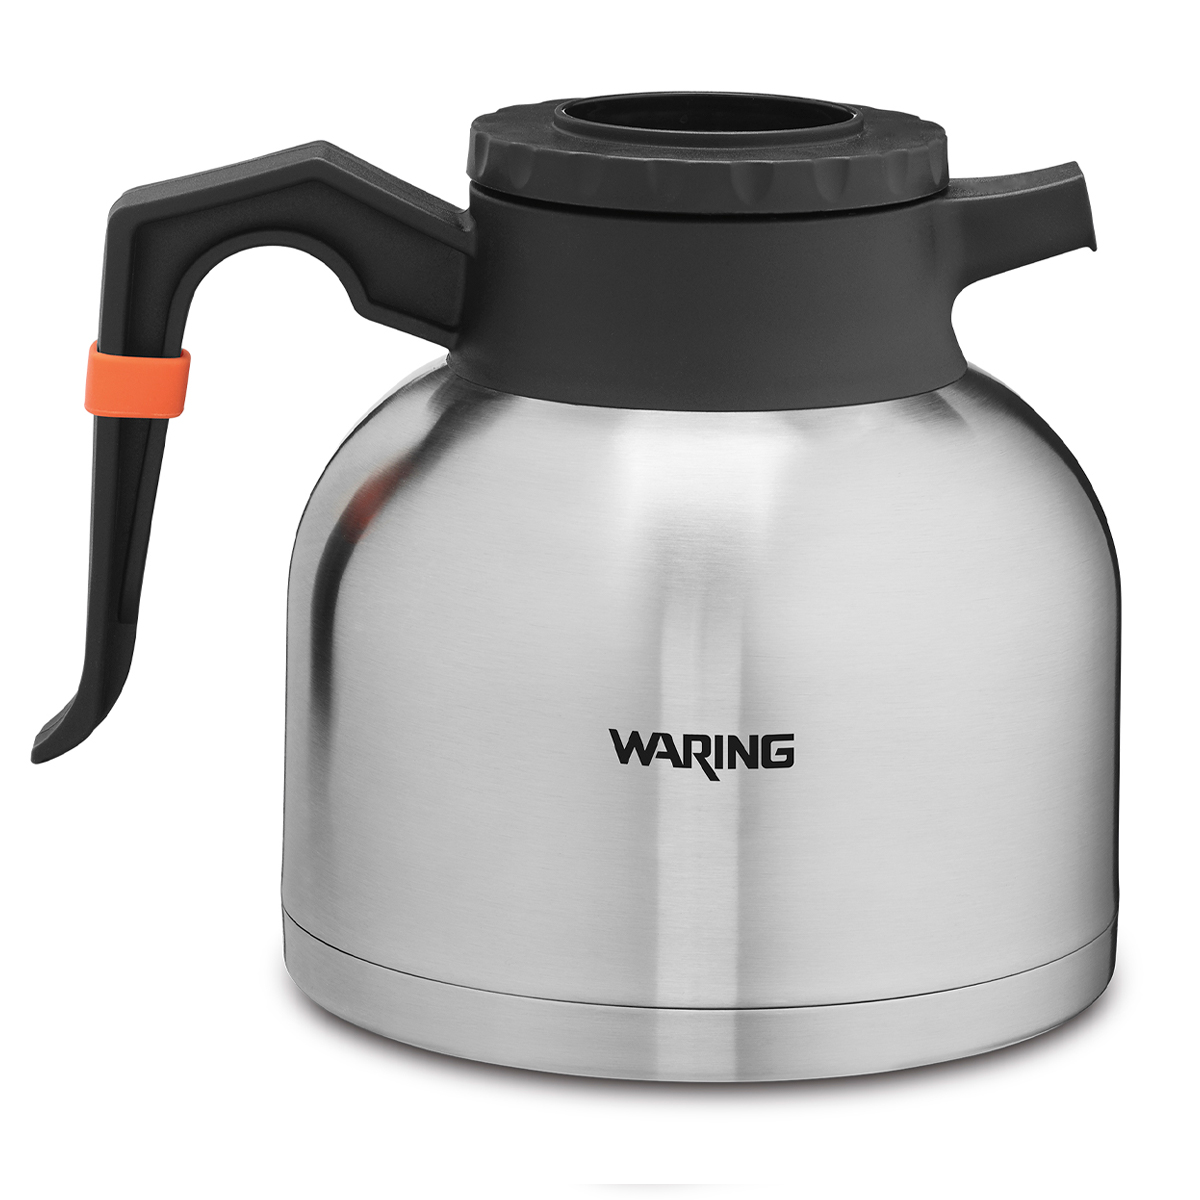 https://www.waringcommercialproducts.com/files/products/wtc64-waring-thermal-carafe-main-image-1200x1200.jpg